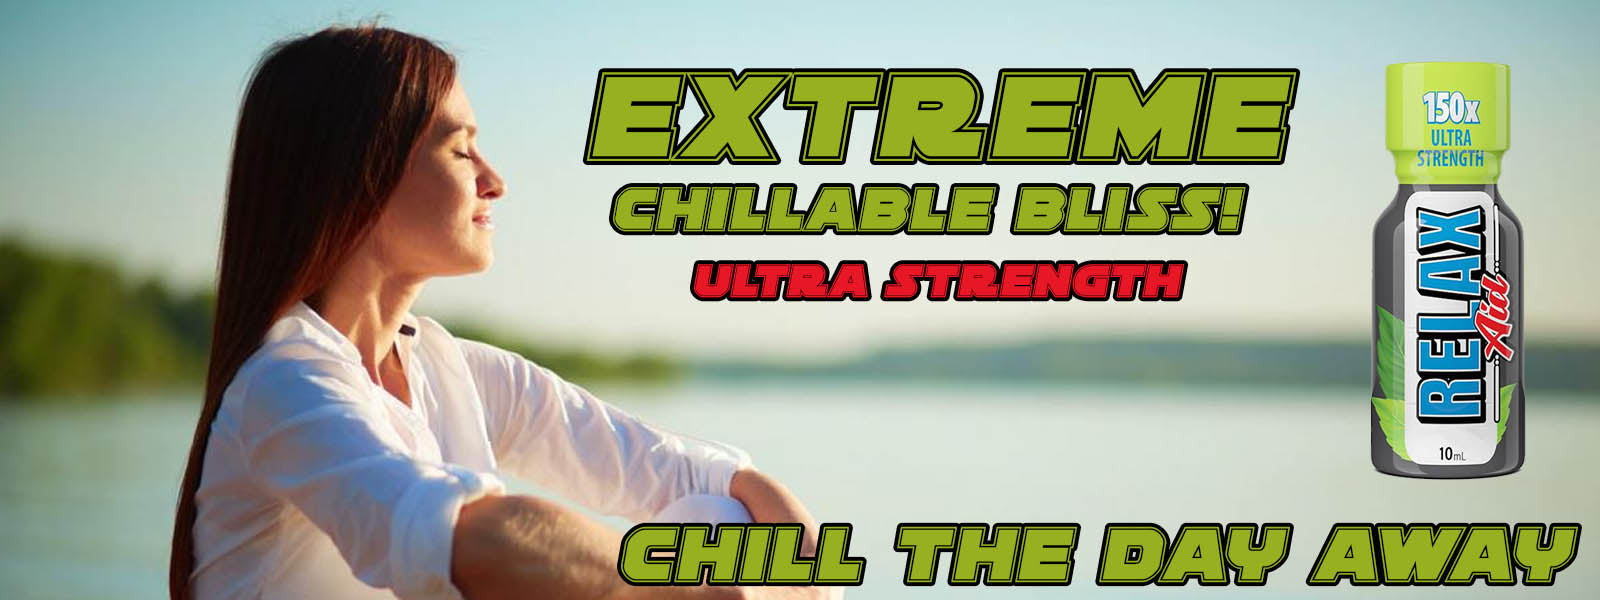 Relax Aid 150X - Ultra Strength